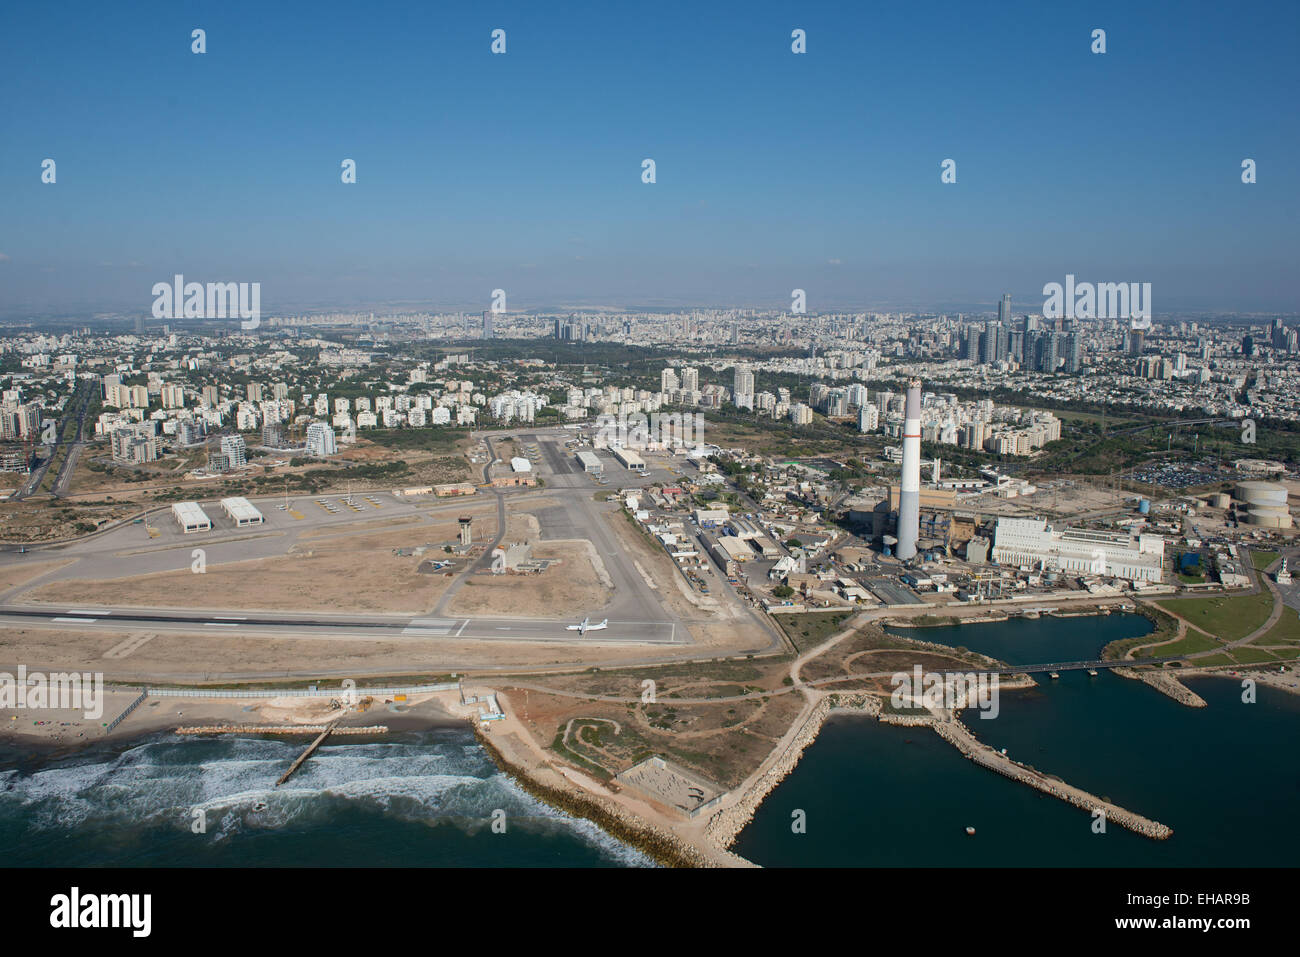 Aerial Photography of Tel Aviv, Israel The flue of the Reading power plant can be seen Stock Photo